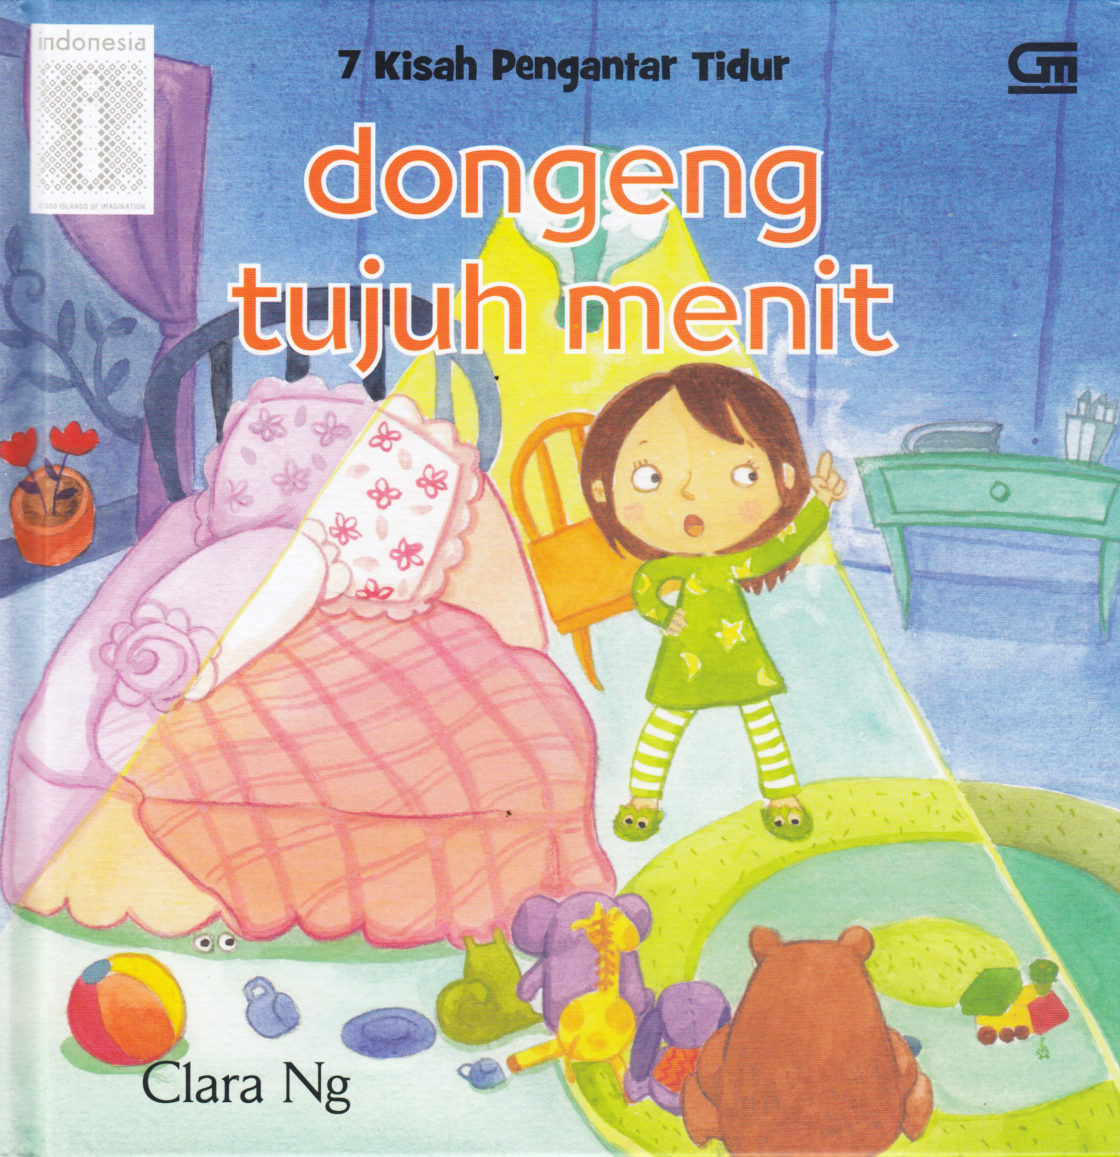 7 Bedtime Stories: Seven Minute Tales (Indonesian)